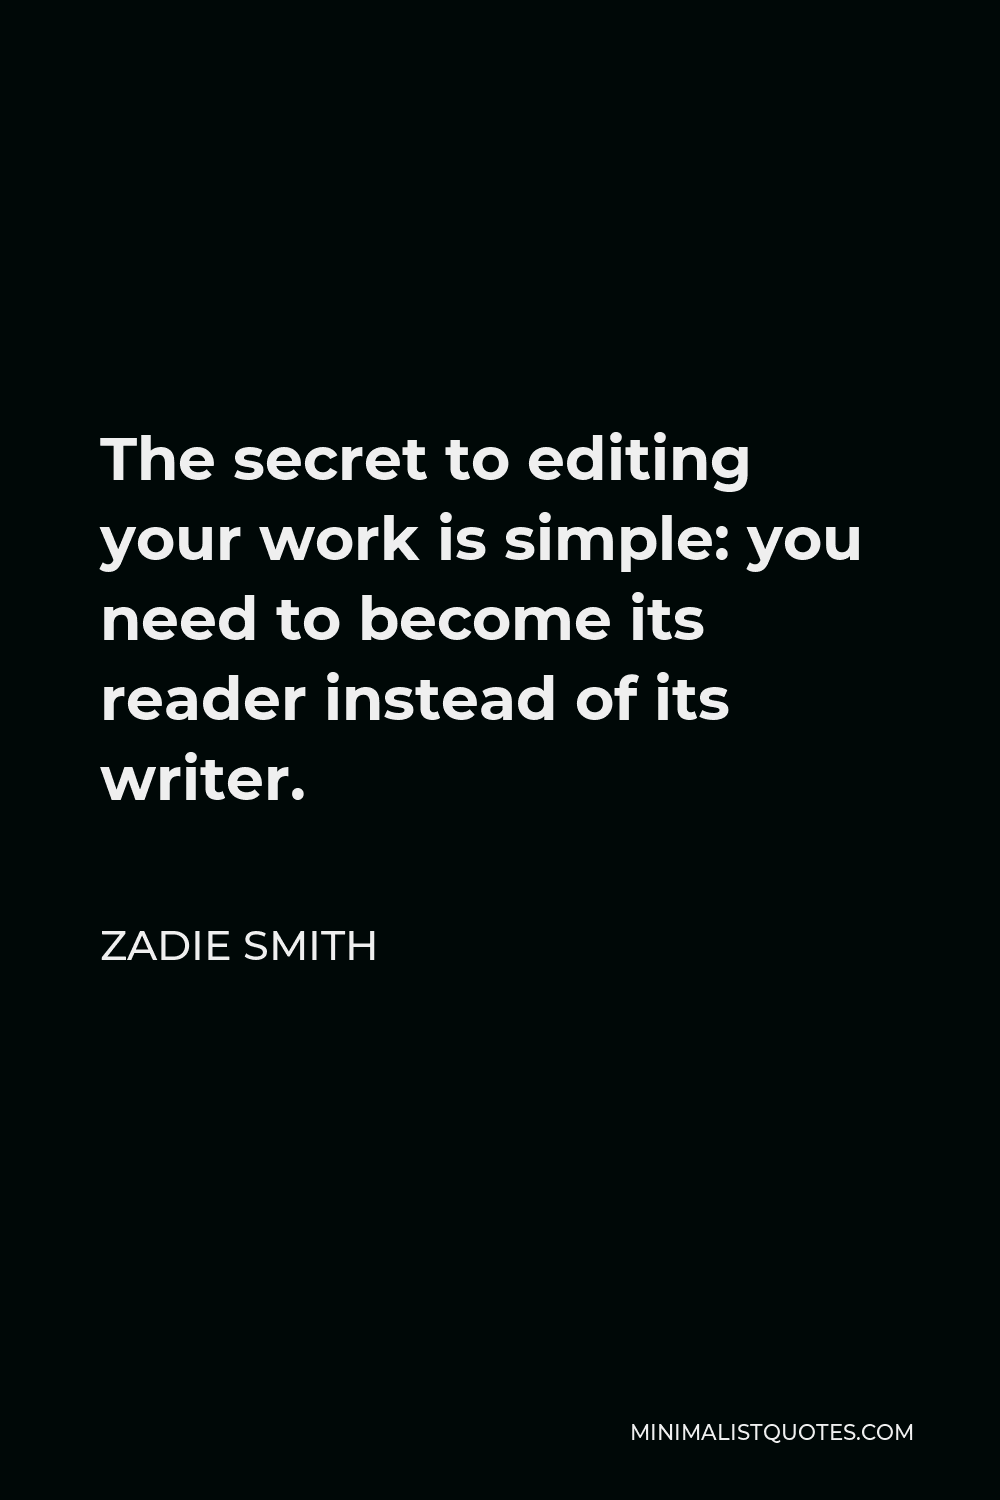 Zadie Smith Quote - The secret to editing your work is simple: you need to become its reader instead of its writer.